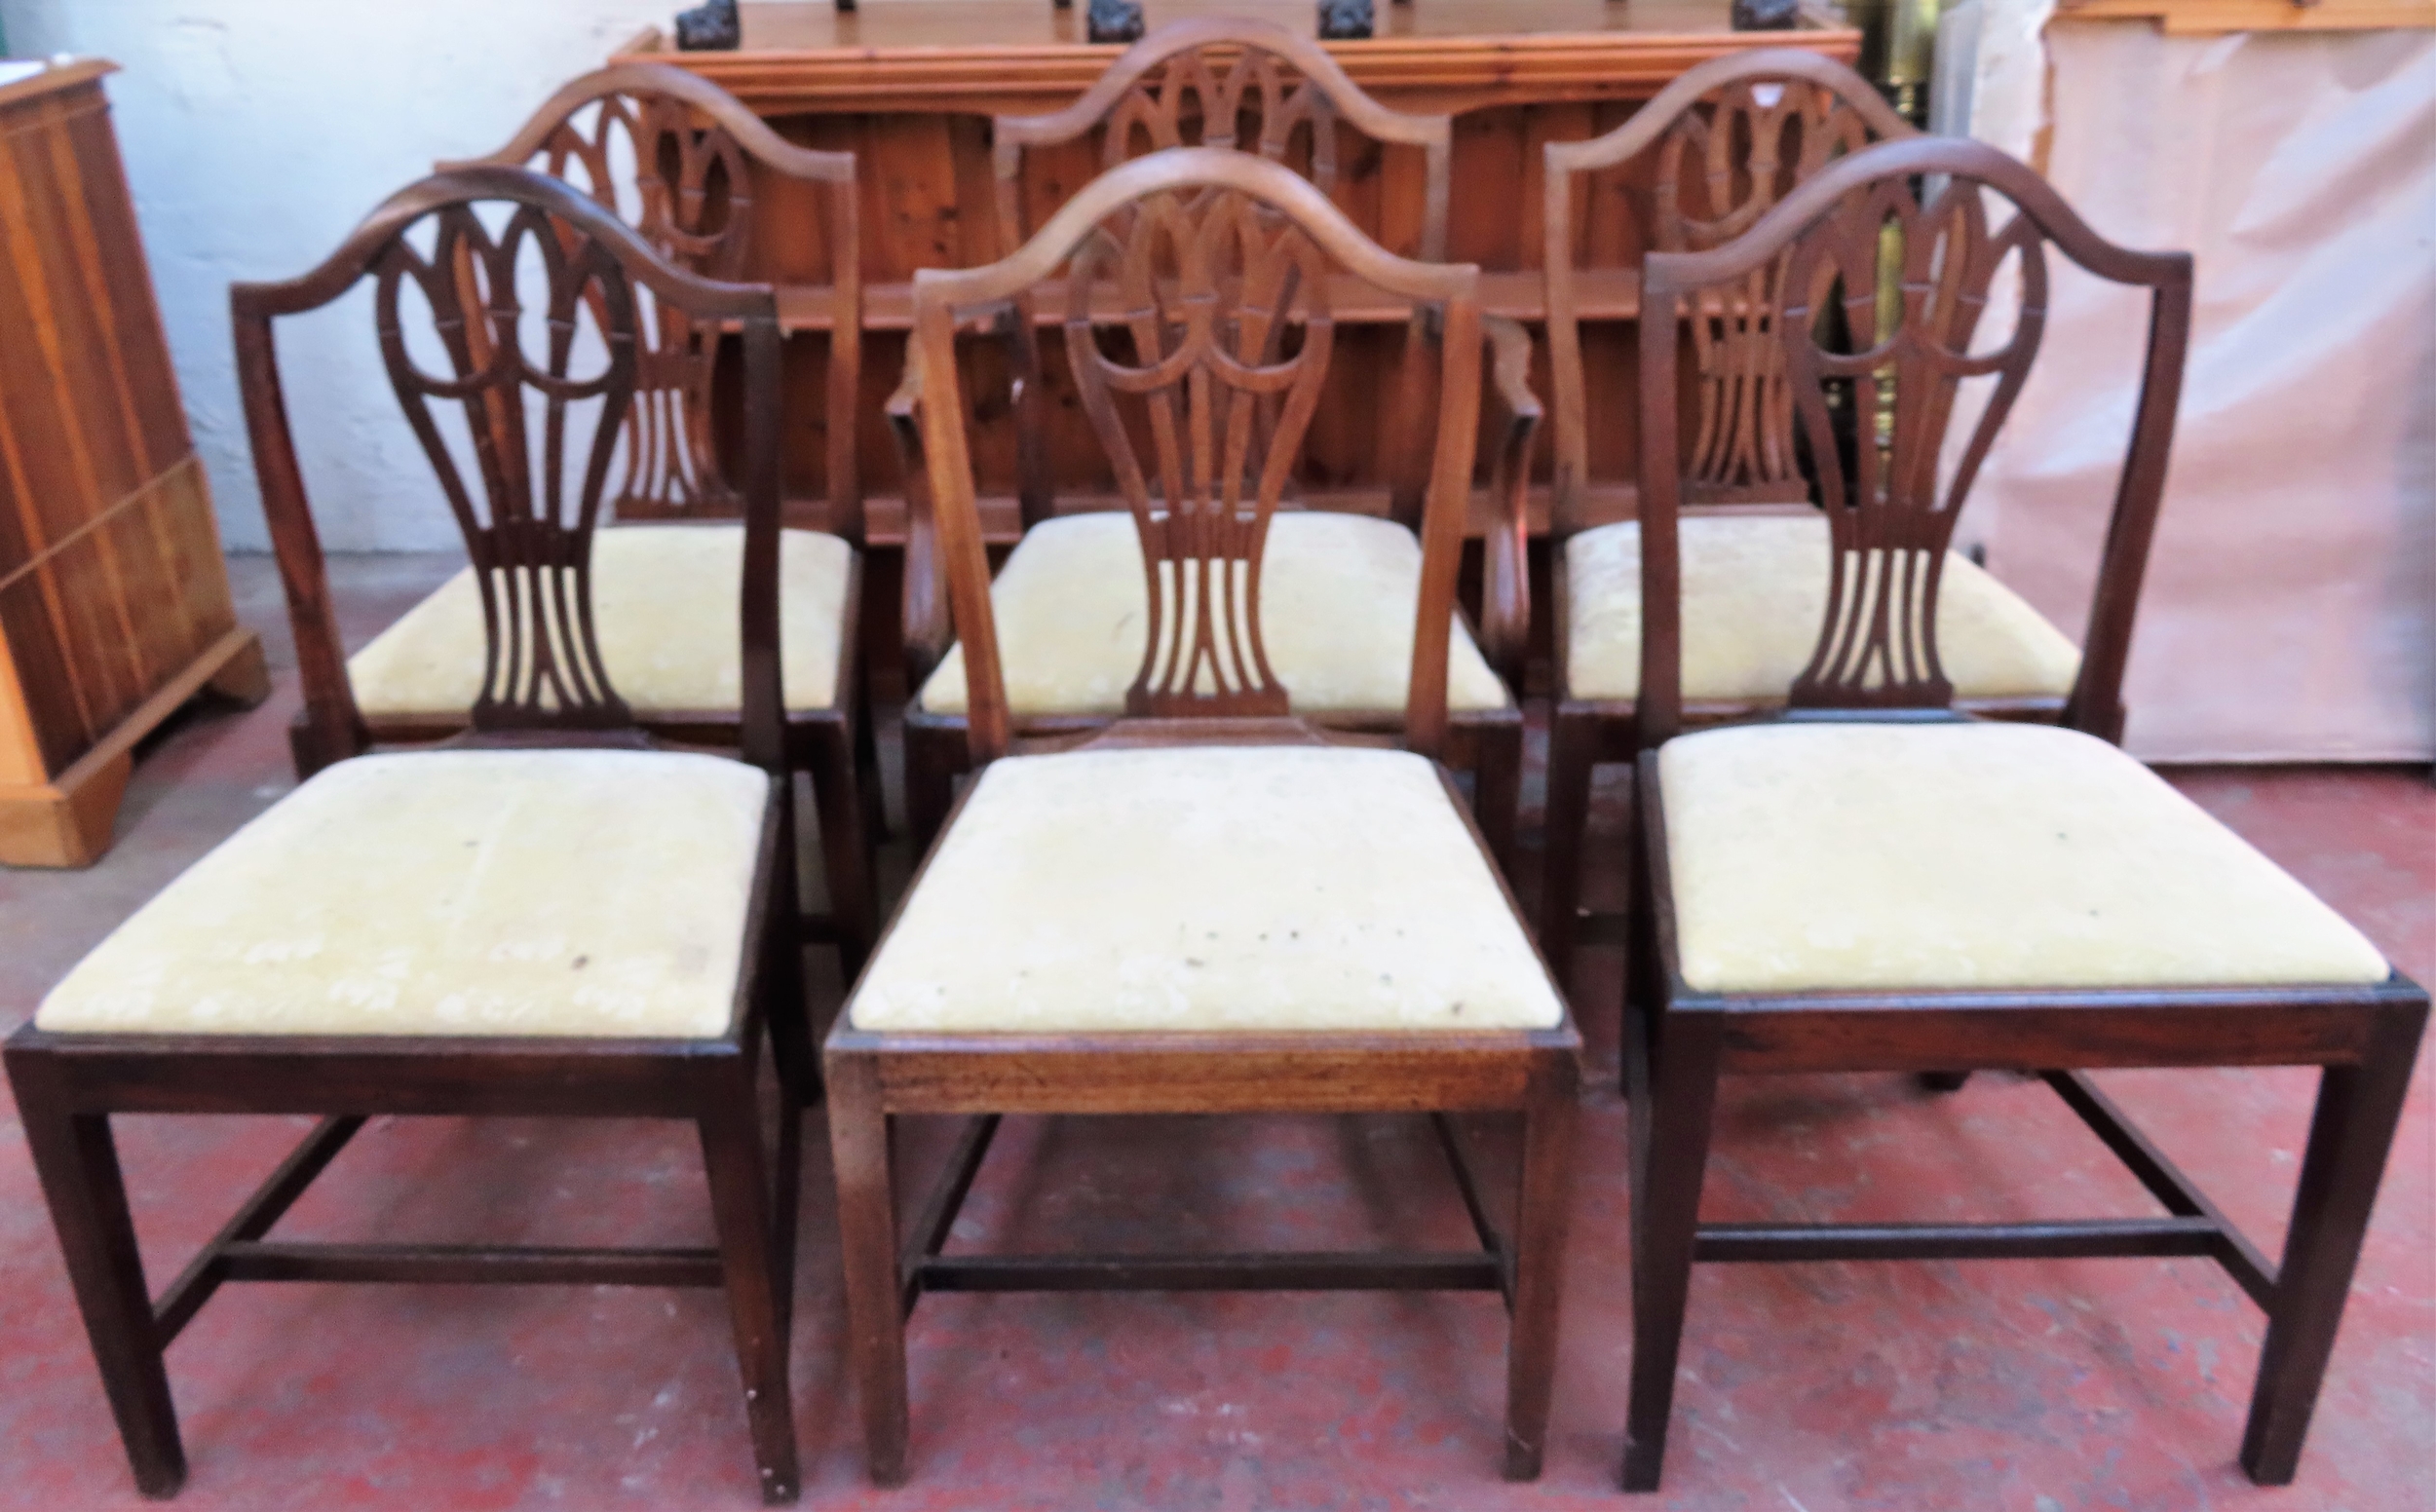 Set of 6 (5+1) 19th century mahogany dining chairs reasonable used condition with minor scuffs and